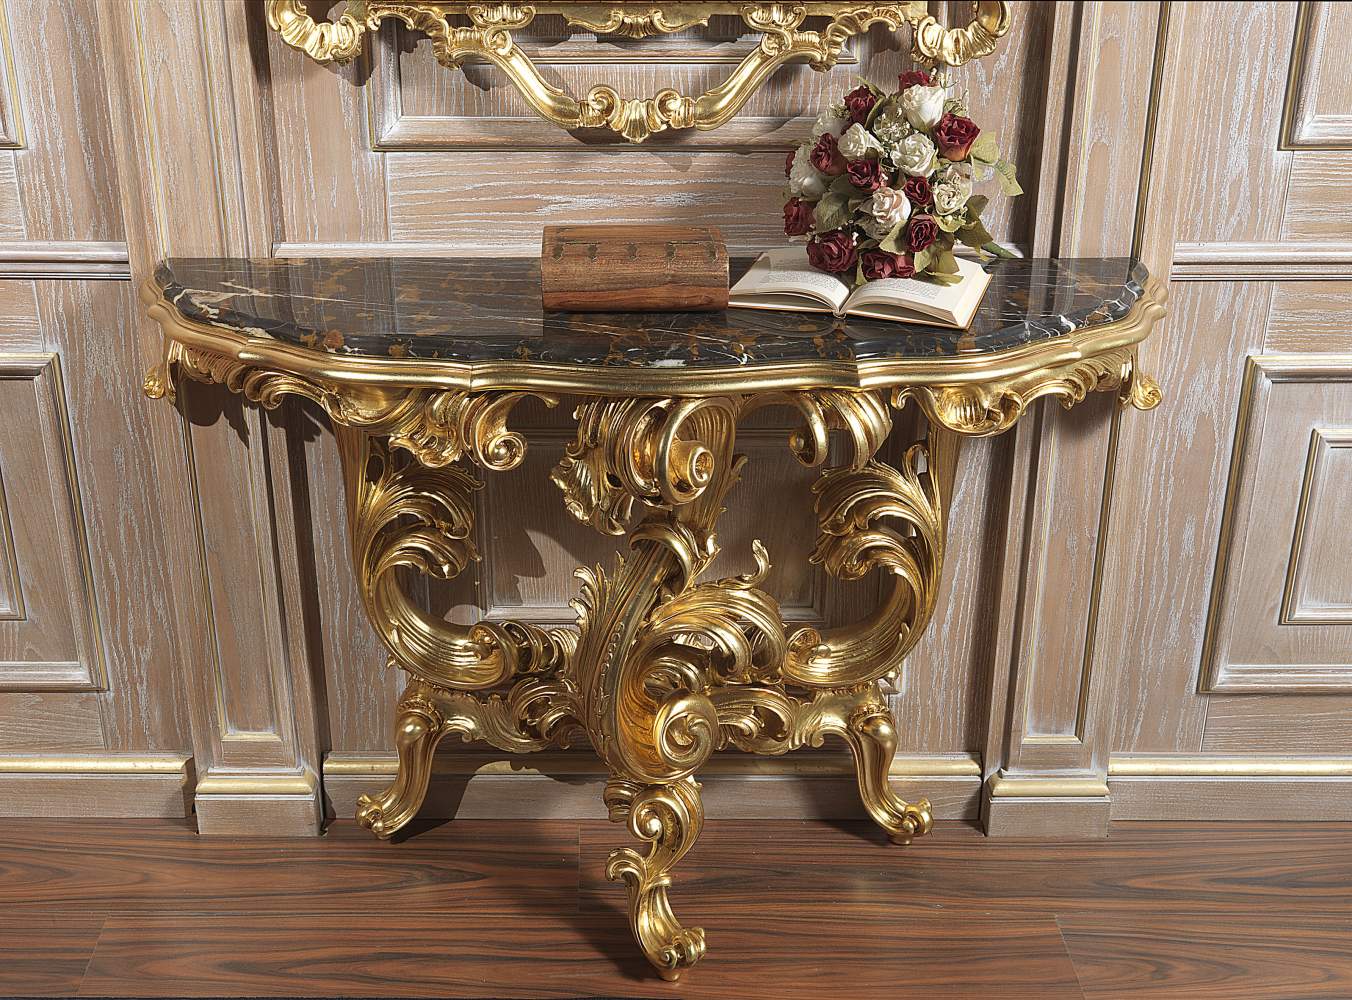 Classic luxury console realized in baroque style